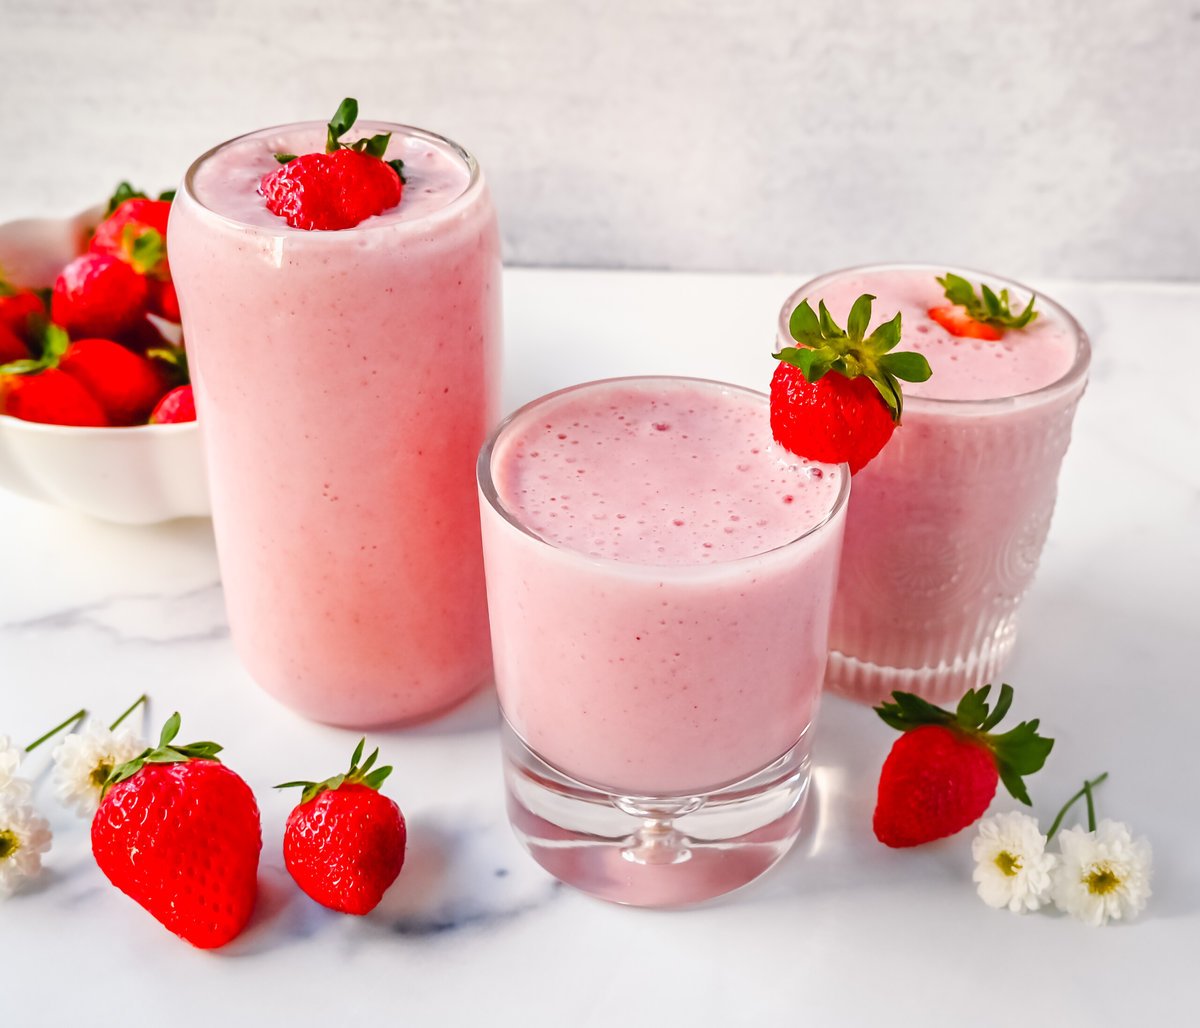 Strawberry Banana Smoothie Recipe. This easy, creamy, refreshing 4-ingredient Strawberry Banana Smoothie is made with strawberries, banana, milk, and a touch of honey and is such a healthy breakfast to start your day.